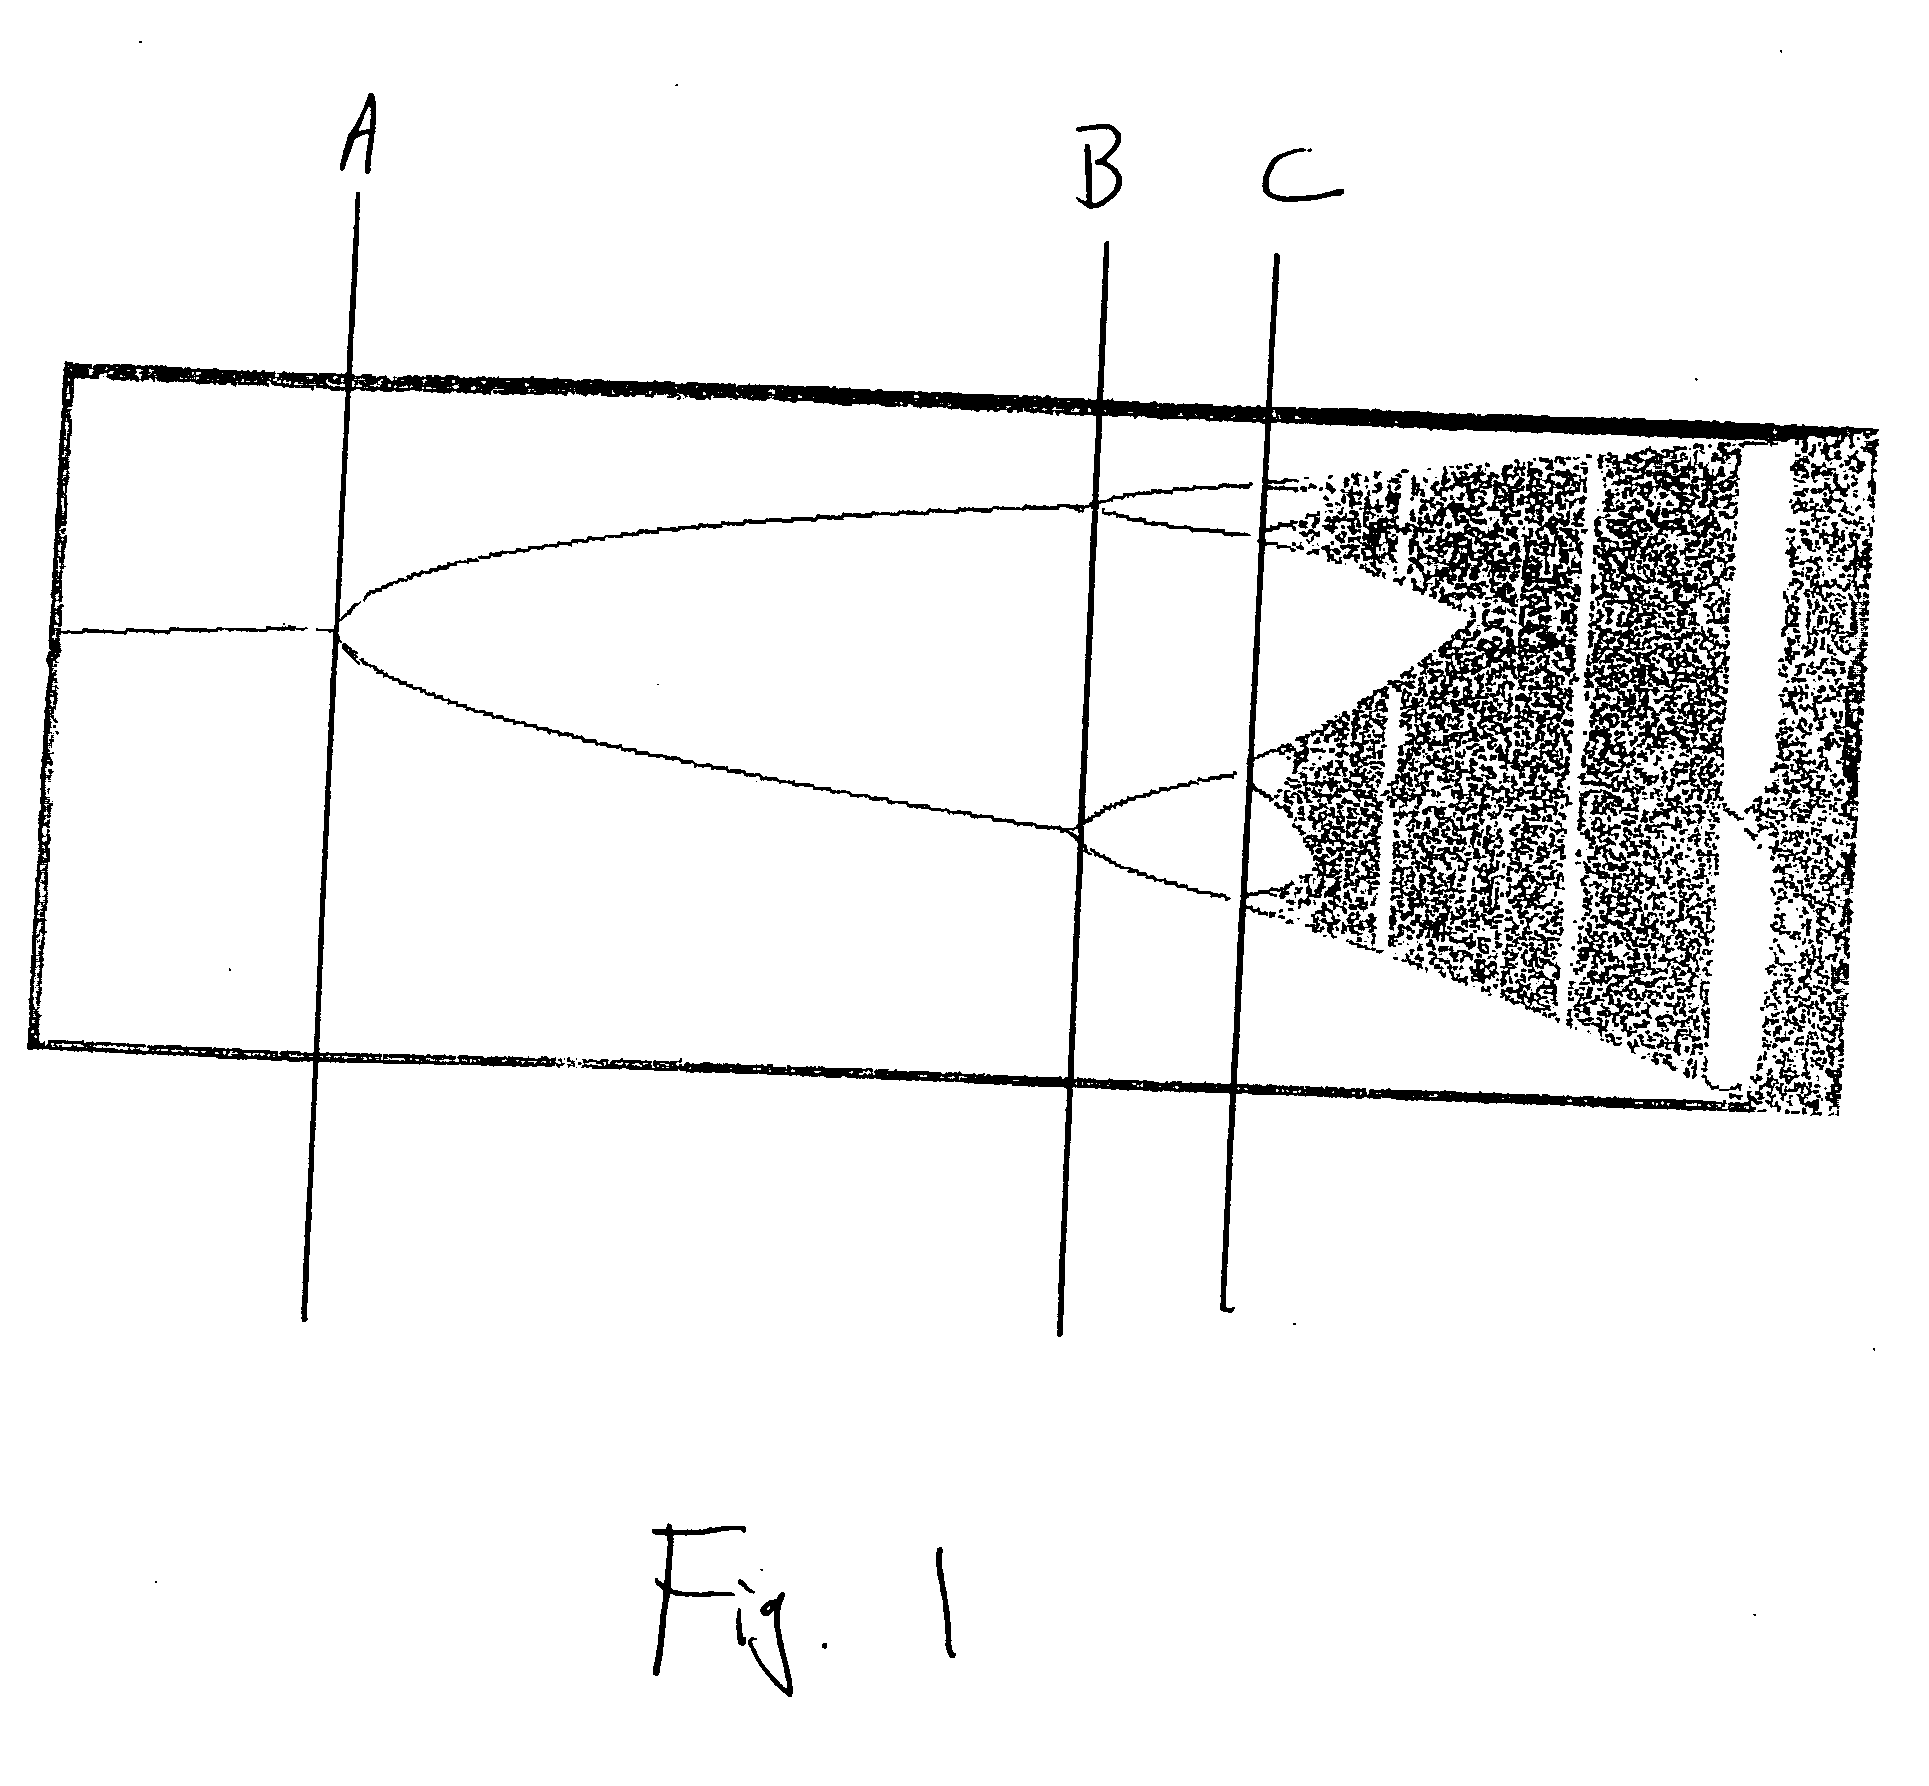 System and method for identifying feature of interest in hyperspectral data